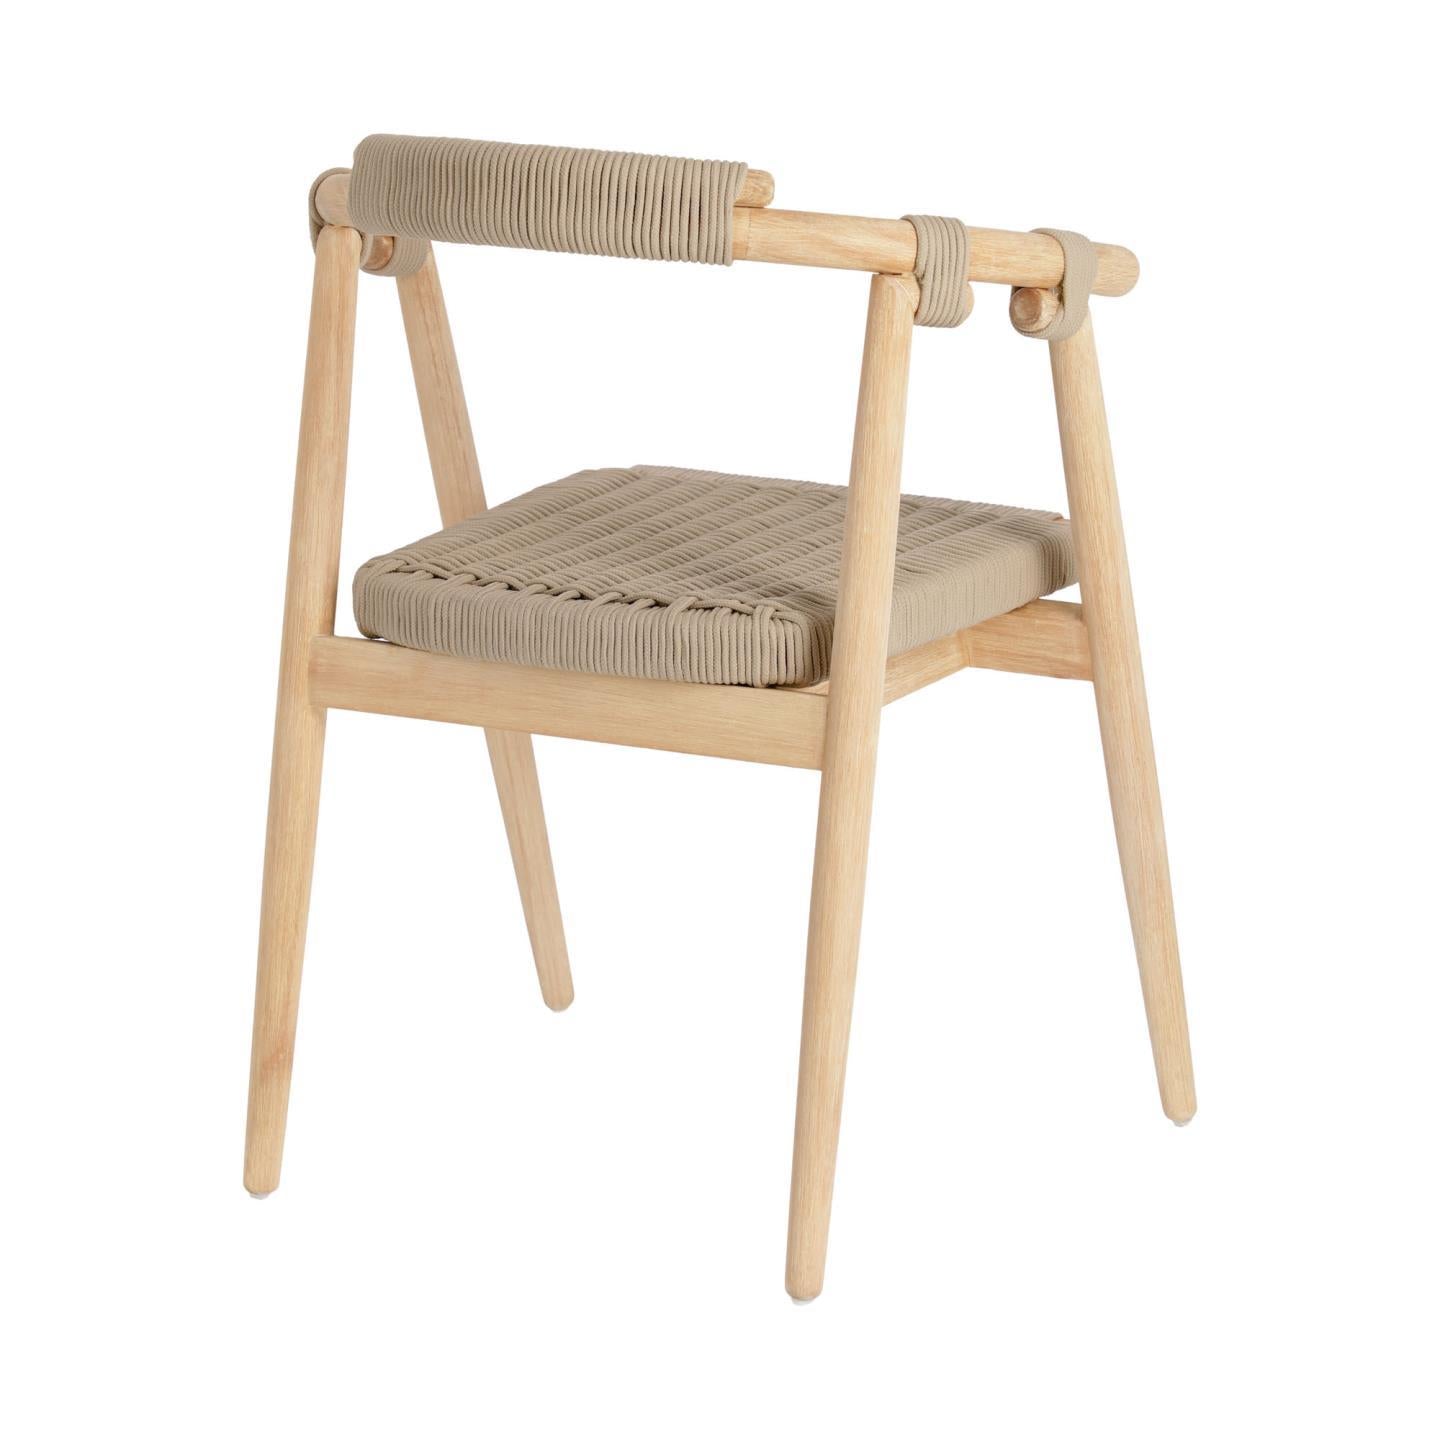 Majela stackable chair in solid 100% FSC eucalyptus with oak-effect finish and beige rope